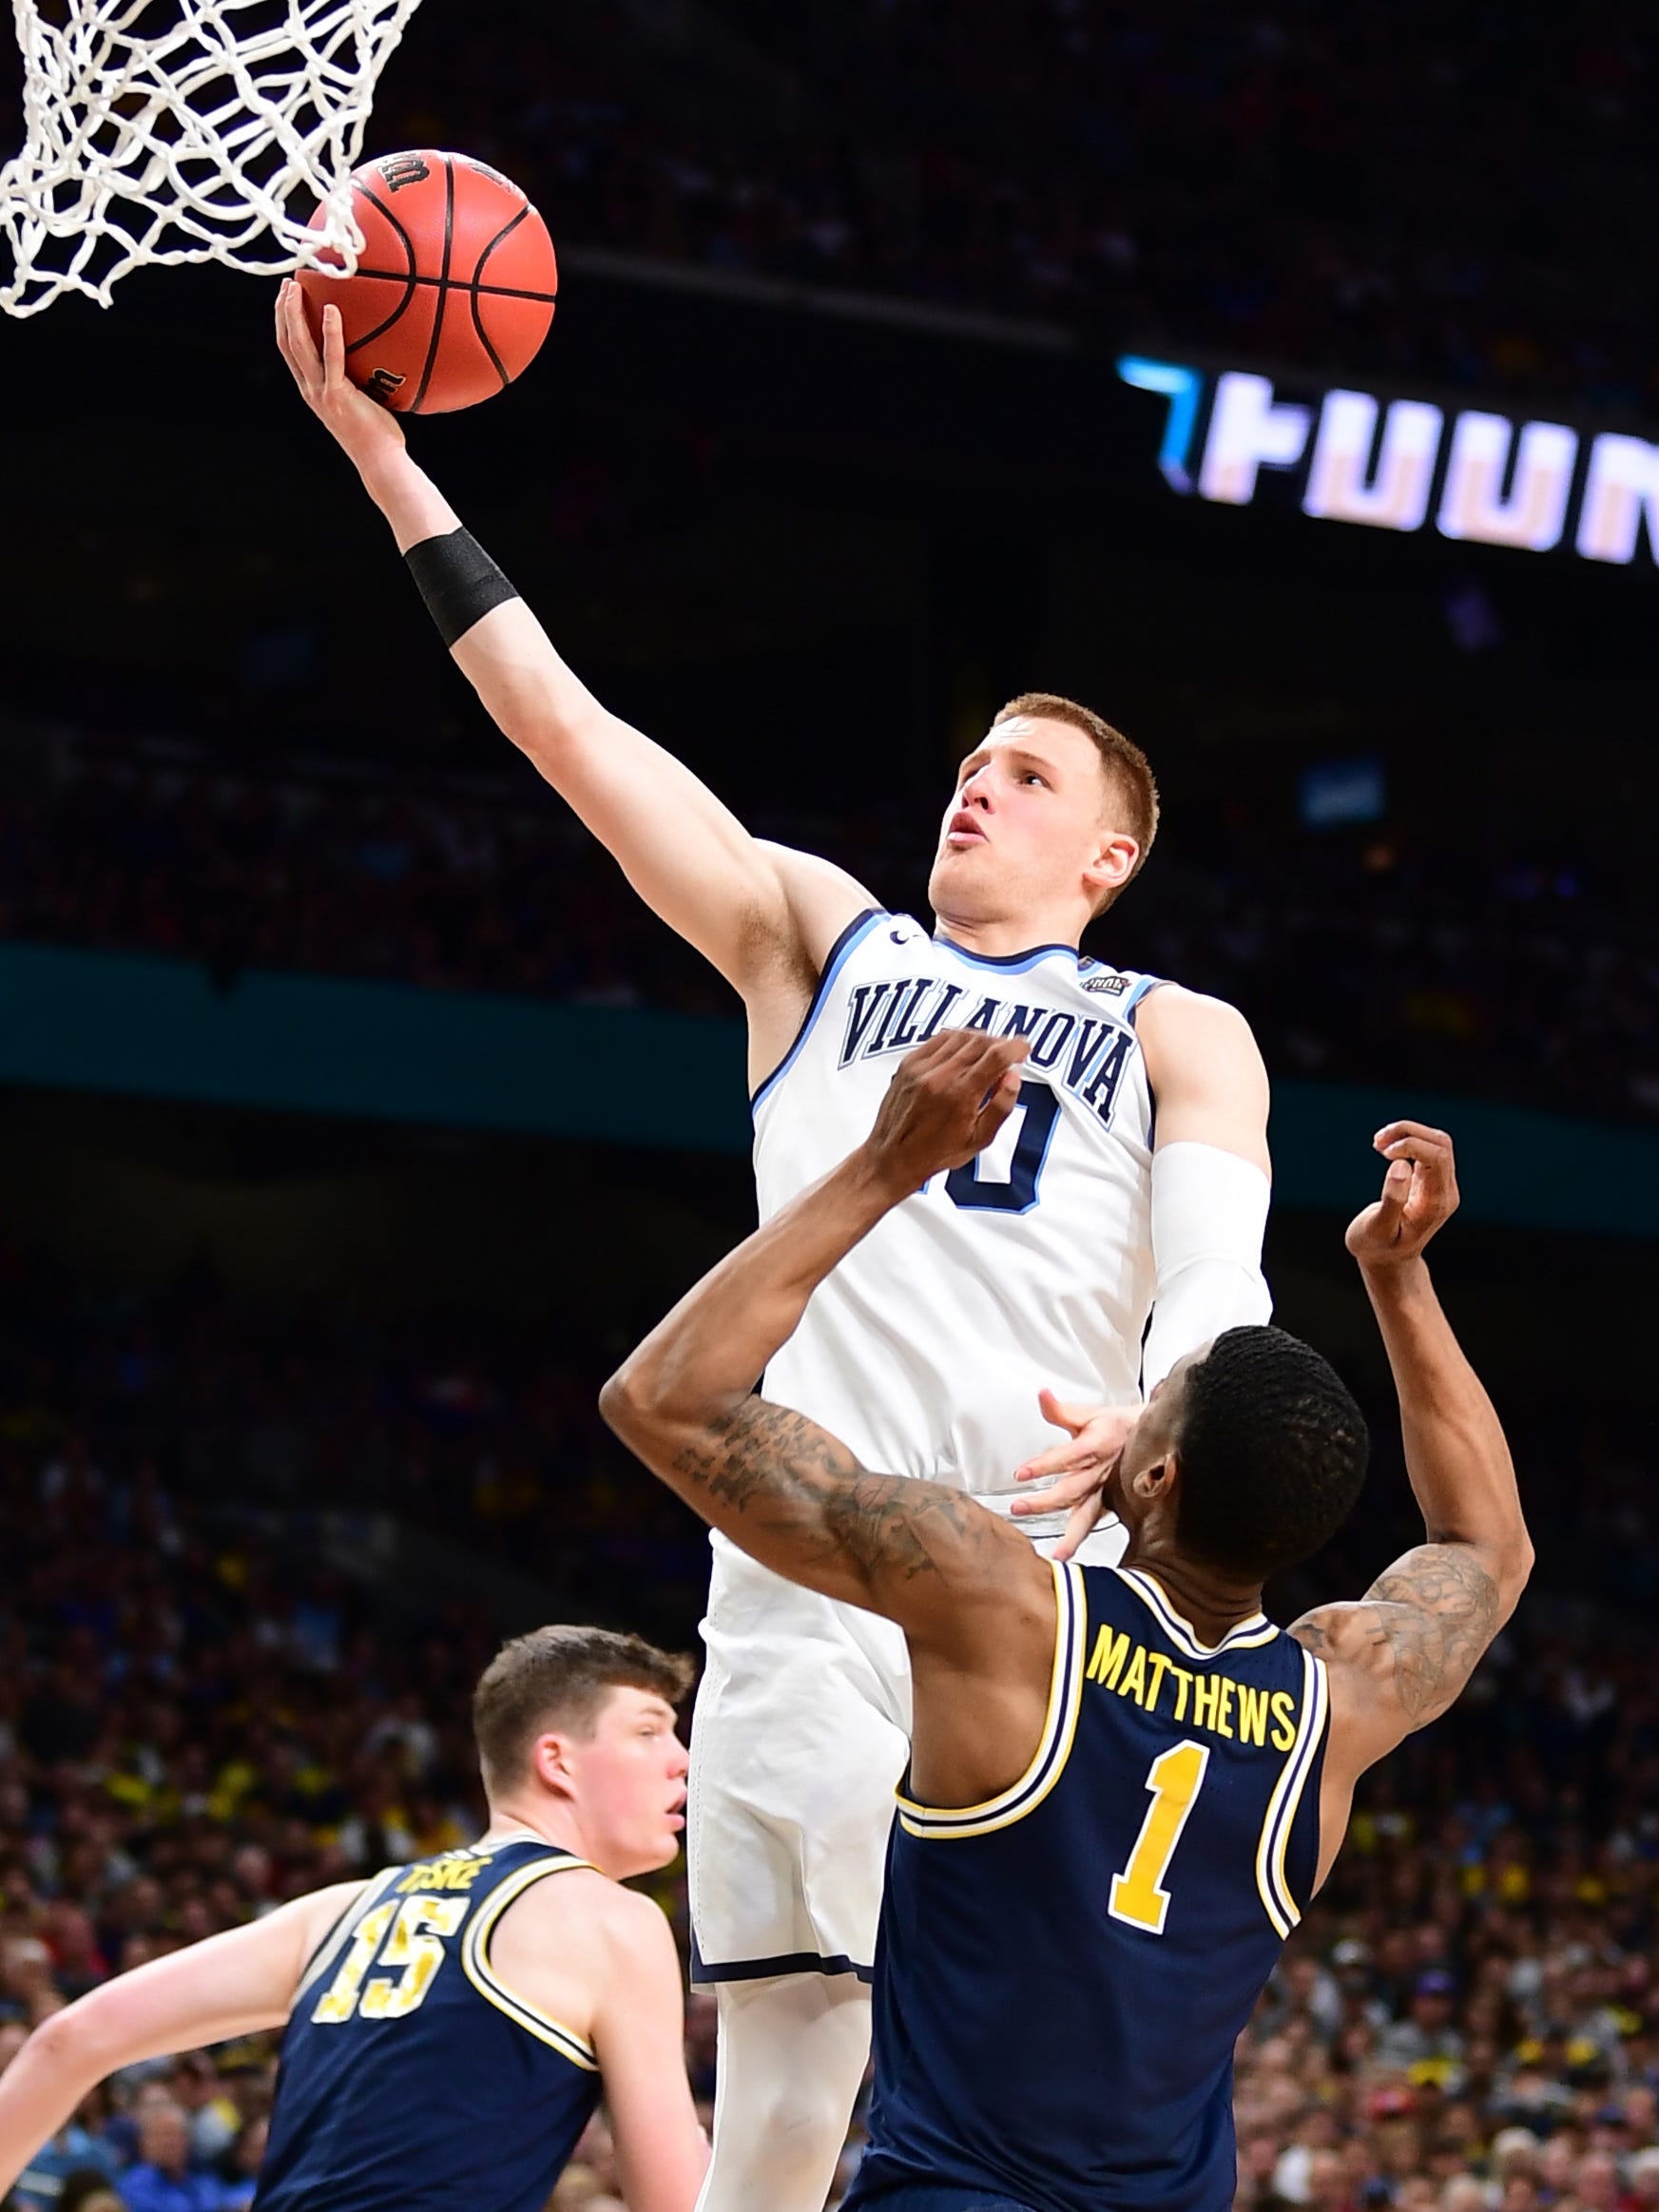 26. Philadelphia 76ers: Donte DiVincenzo, PG, Fr., Villanova. DiVincenzo made a name for himself in the NCAA Tournament, helping the Wildcats to a second championship in three seasons. He flashed uncanny athleticism and an ability to score all over the court. His stock elevated him from a second-round prospect into the first round — and some projections have him going in the lottery. This would be a steal for the Sixers.